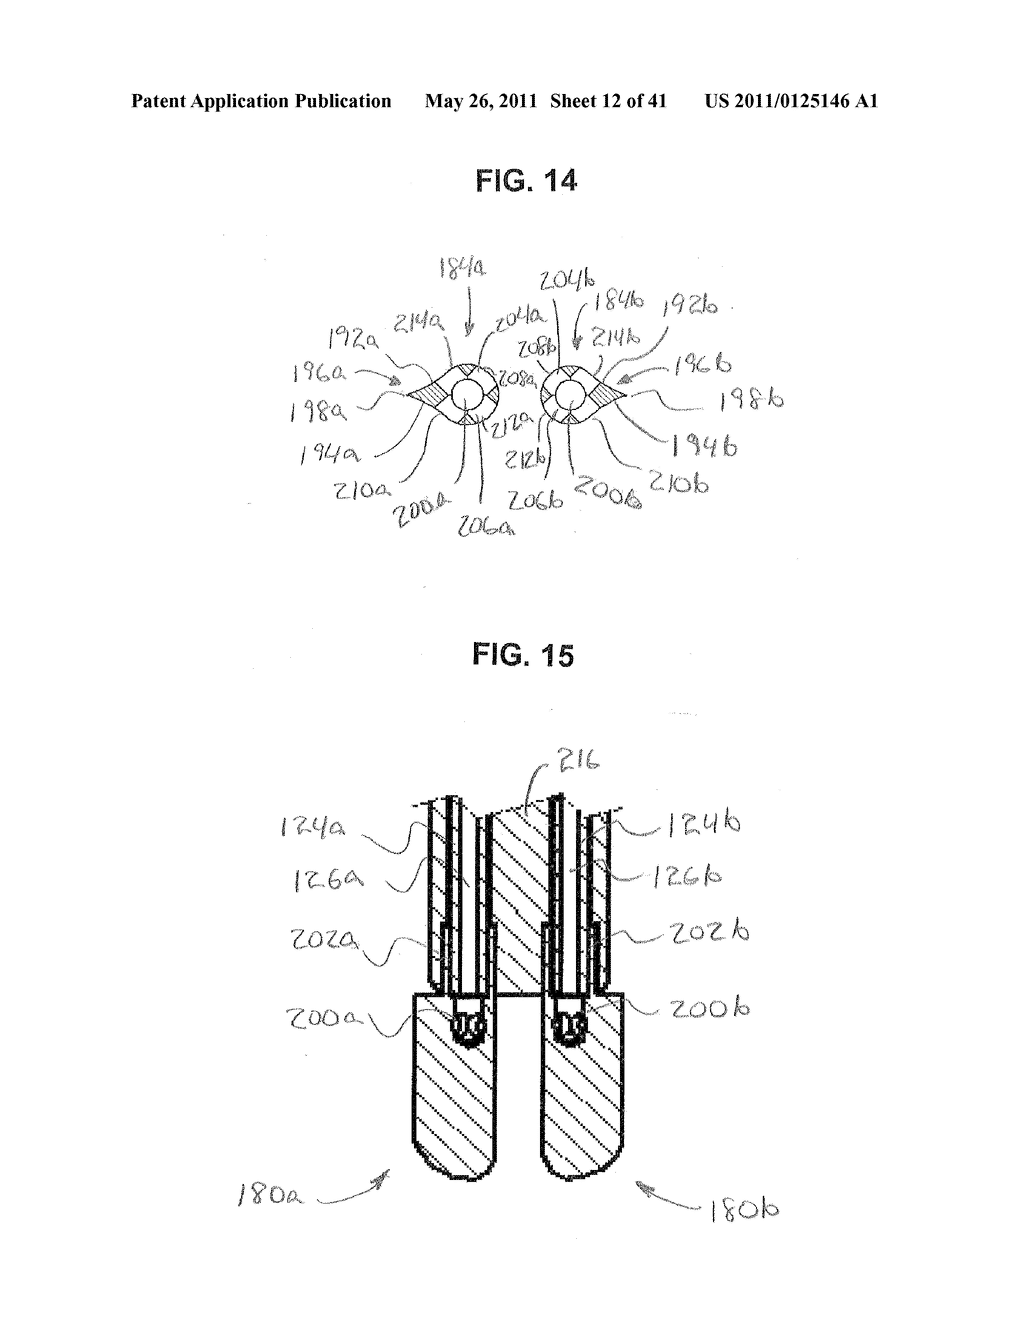 Cartridge Assembly For Electrosurgical Devices, Electrosurgical Unit And Methods Of Use Thereof - diagram, schematic, and image 13